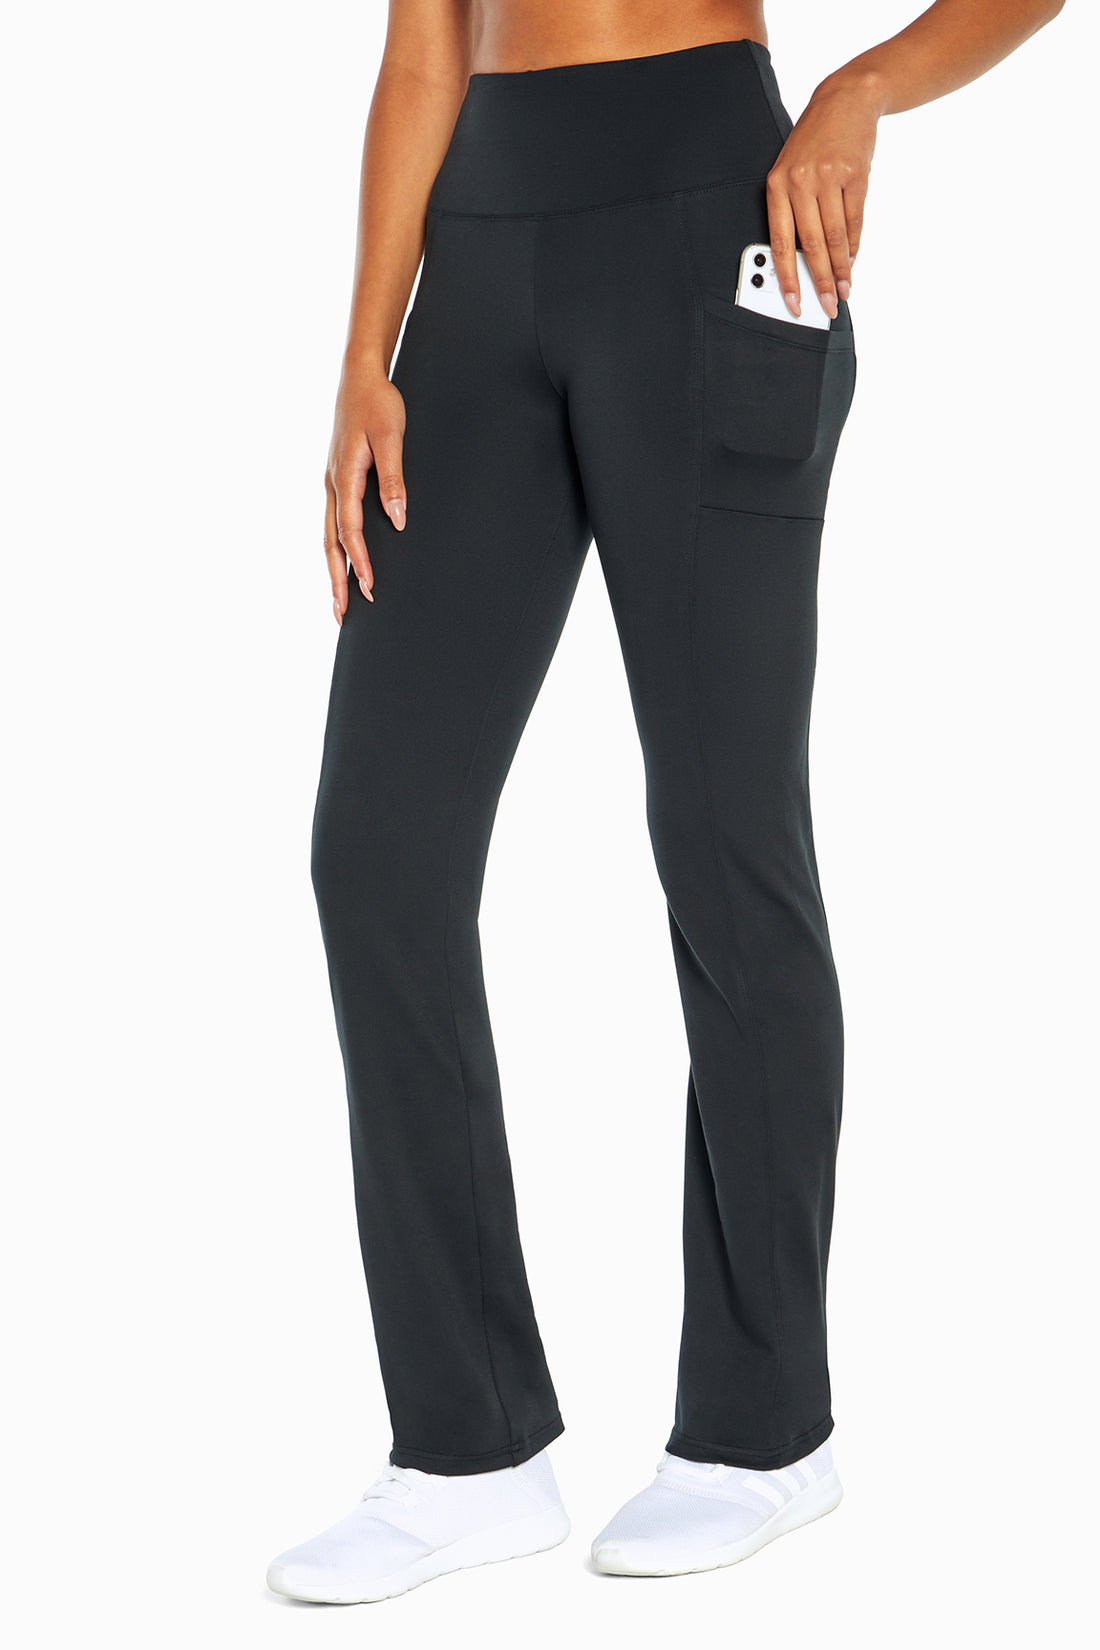 Marika Women's Audrey Butt Booster Pant 32, Inseam, Black, Small :  : Clothing, Shoes & Accessories